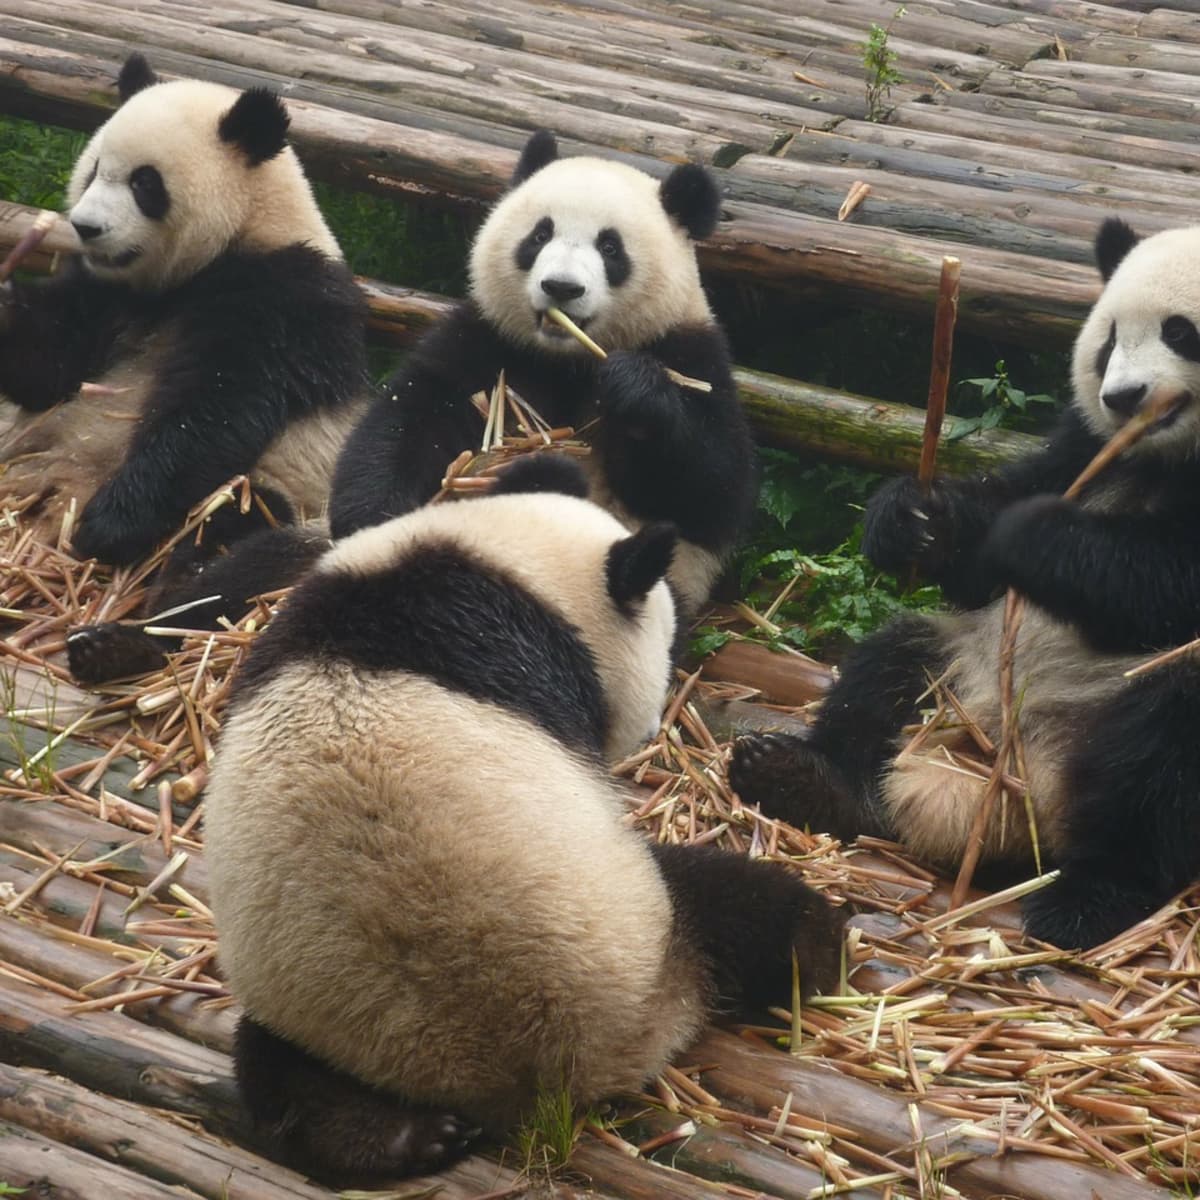 Giant Pandas In Chinese Wildlife, Within The Whole World - HubPages